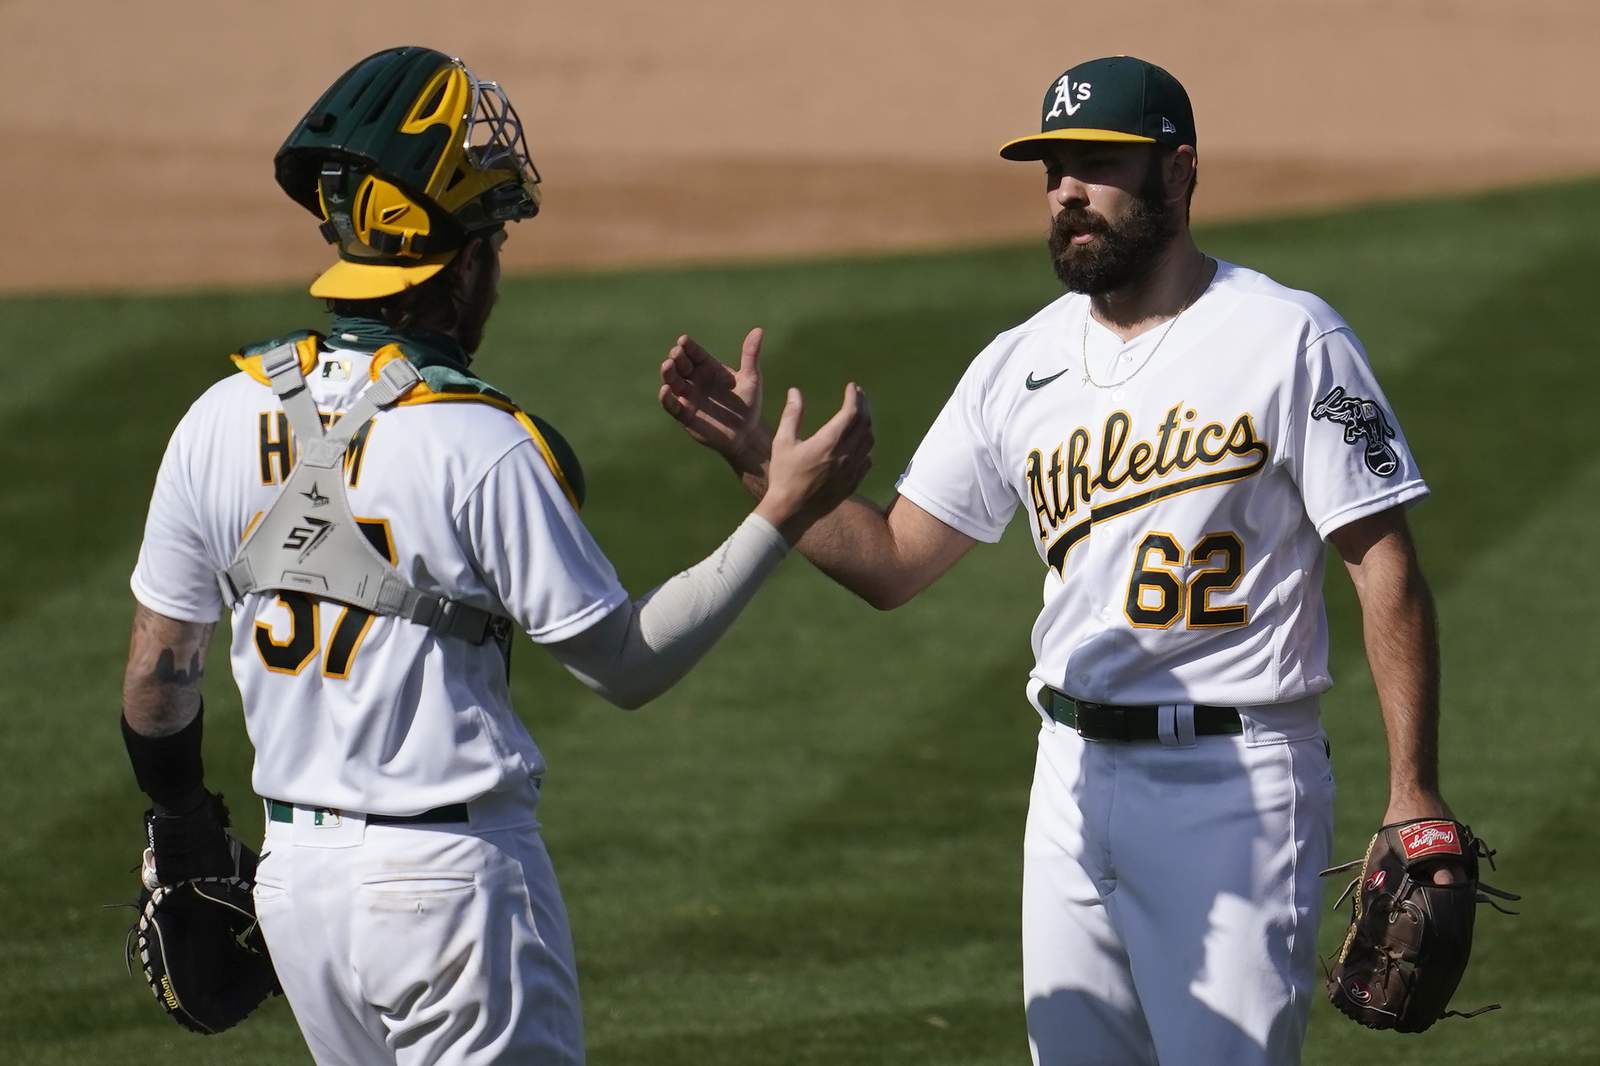 Athletics clinch first AL West title since 2013